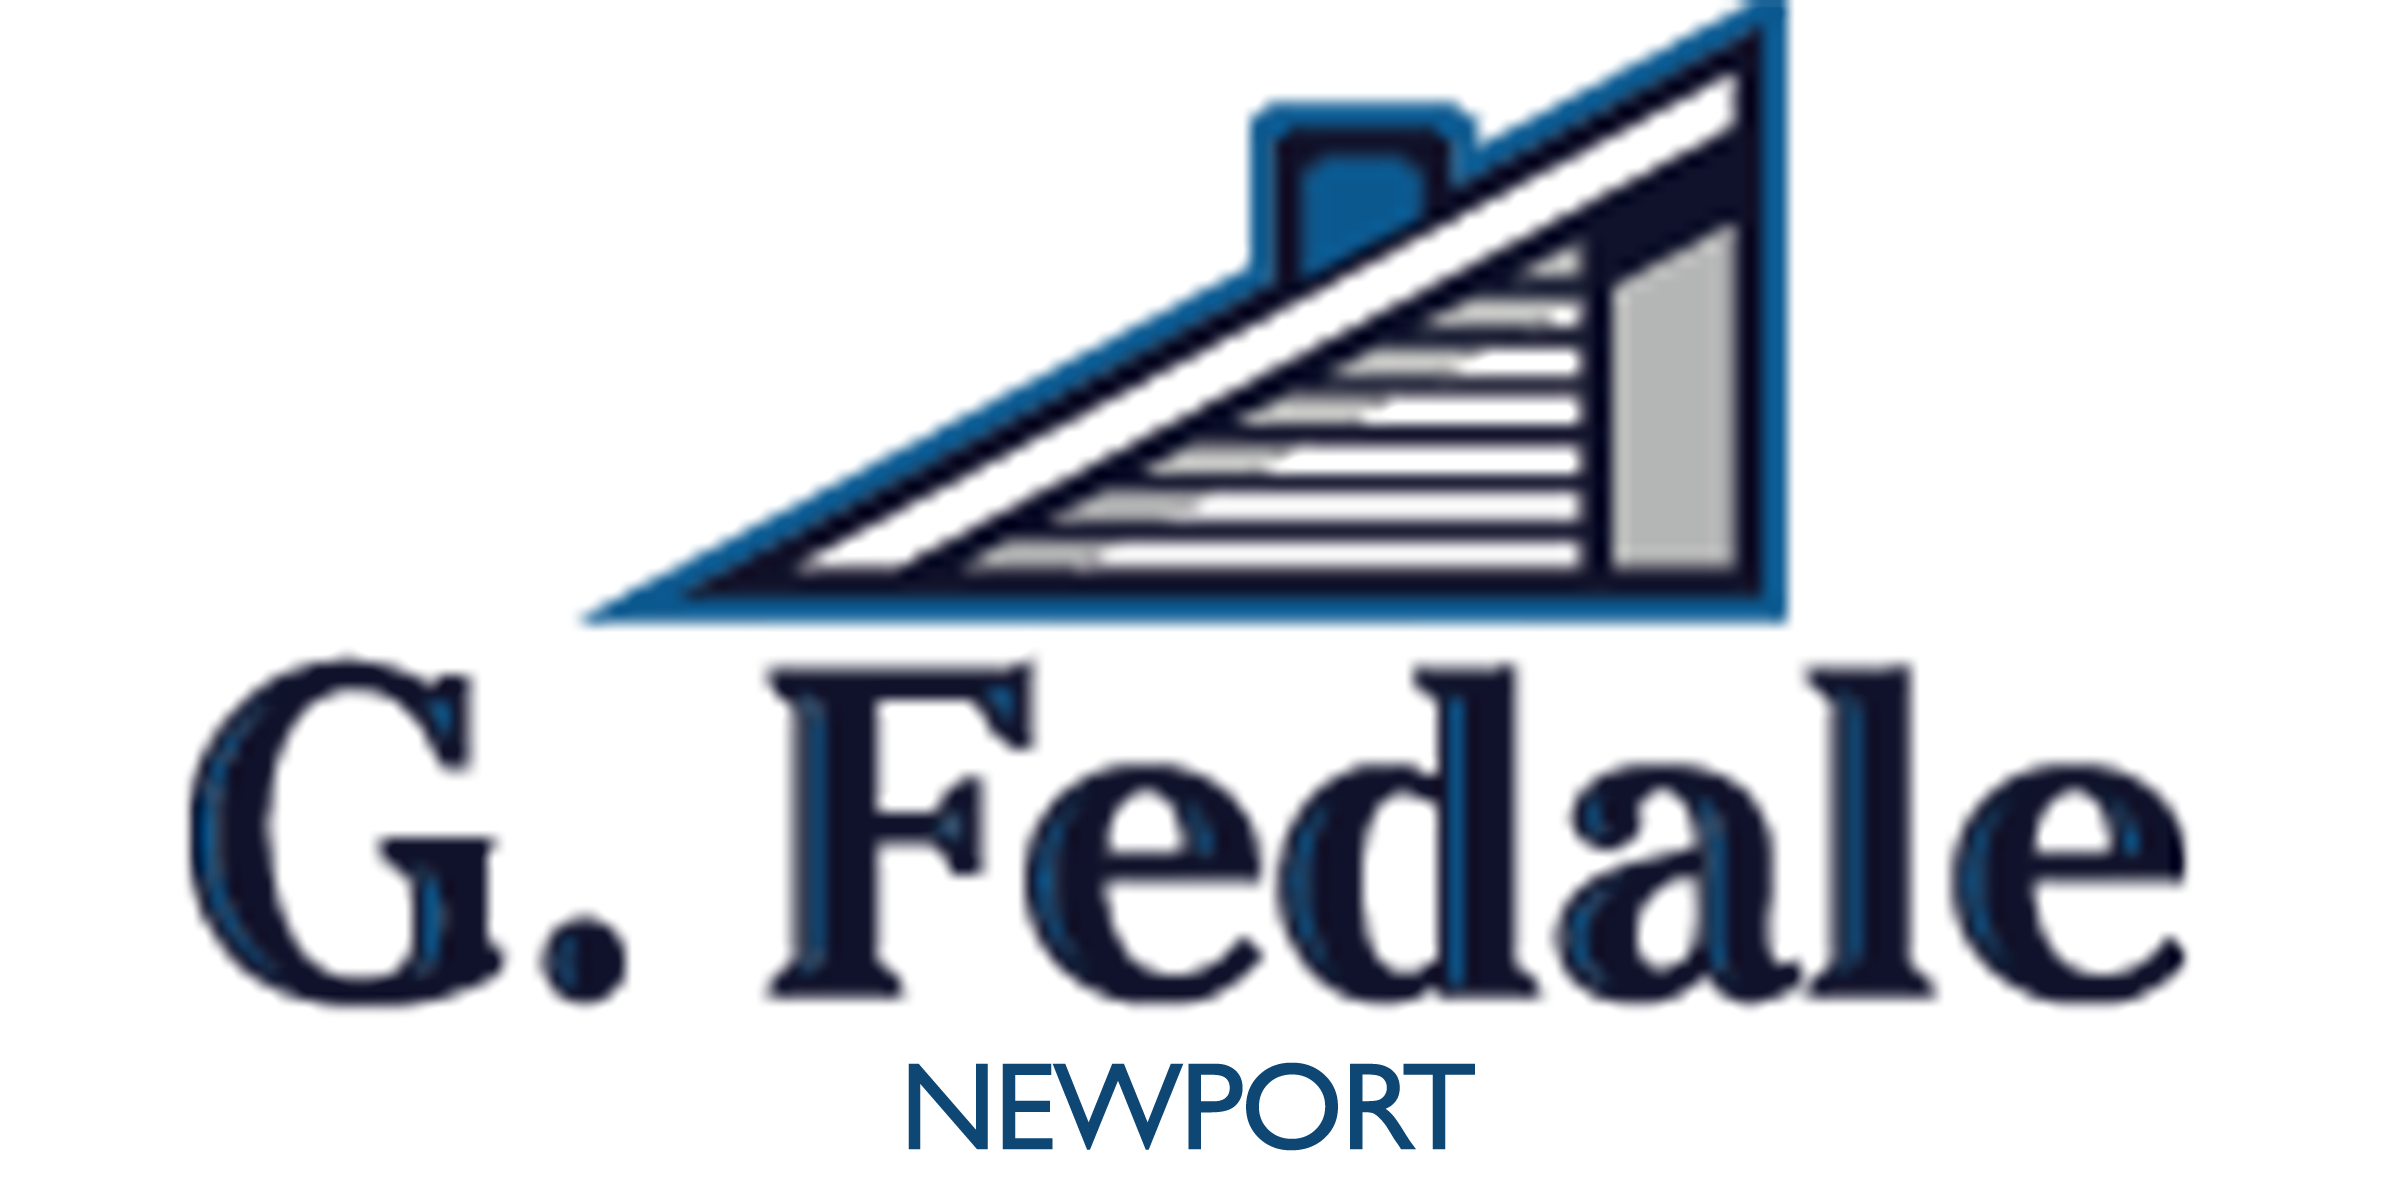 G. Fedale Roofing & Siding - Newport logo